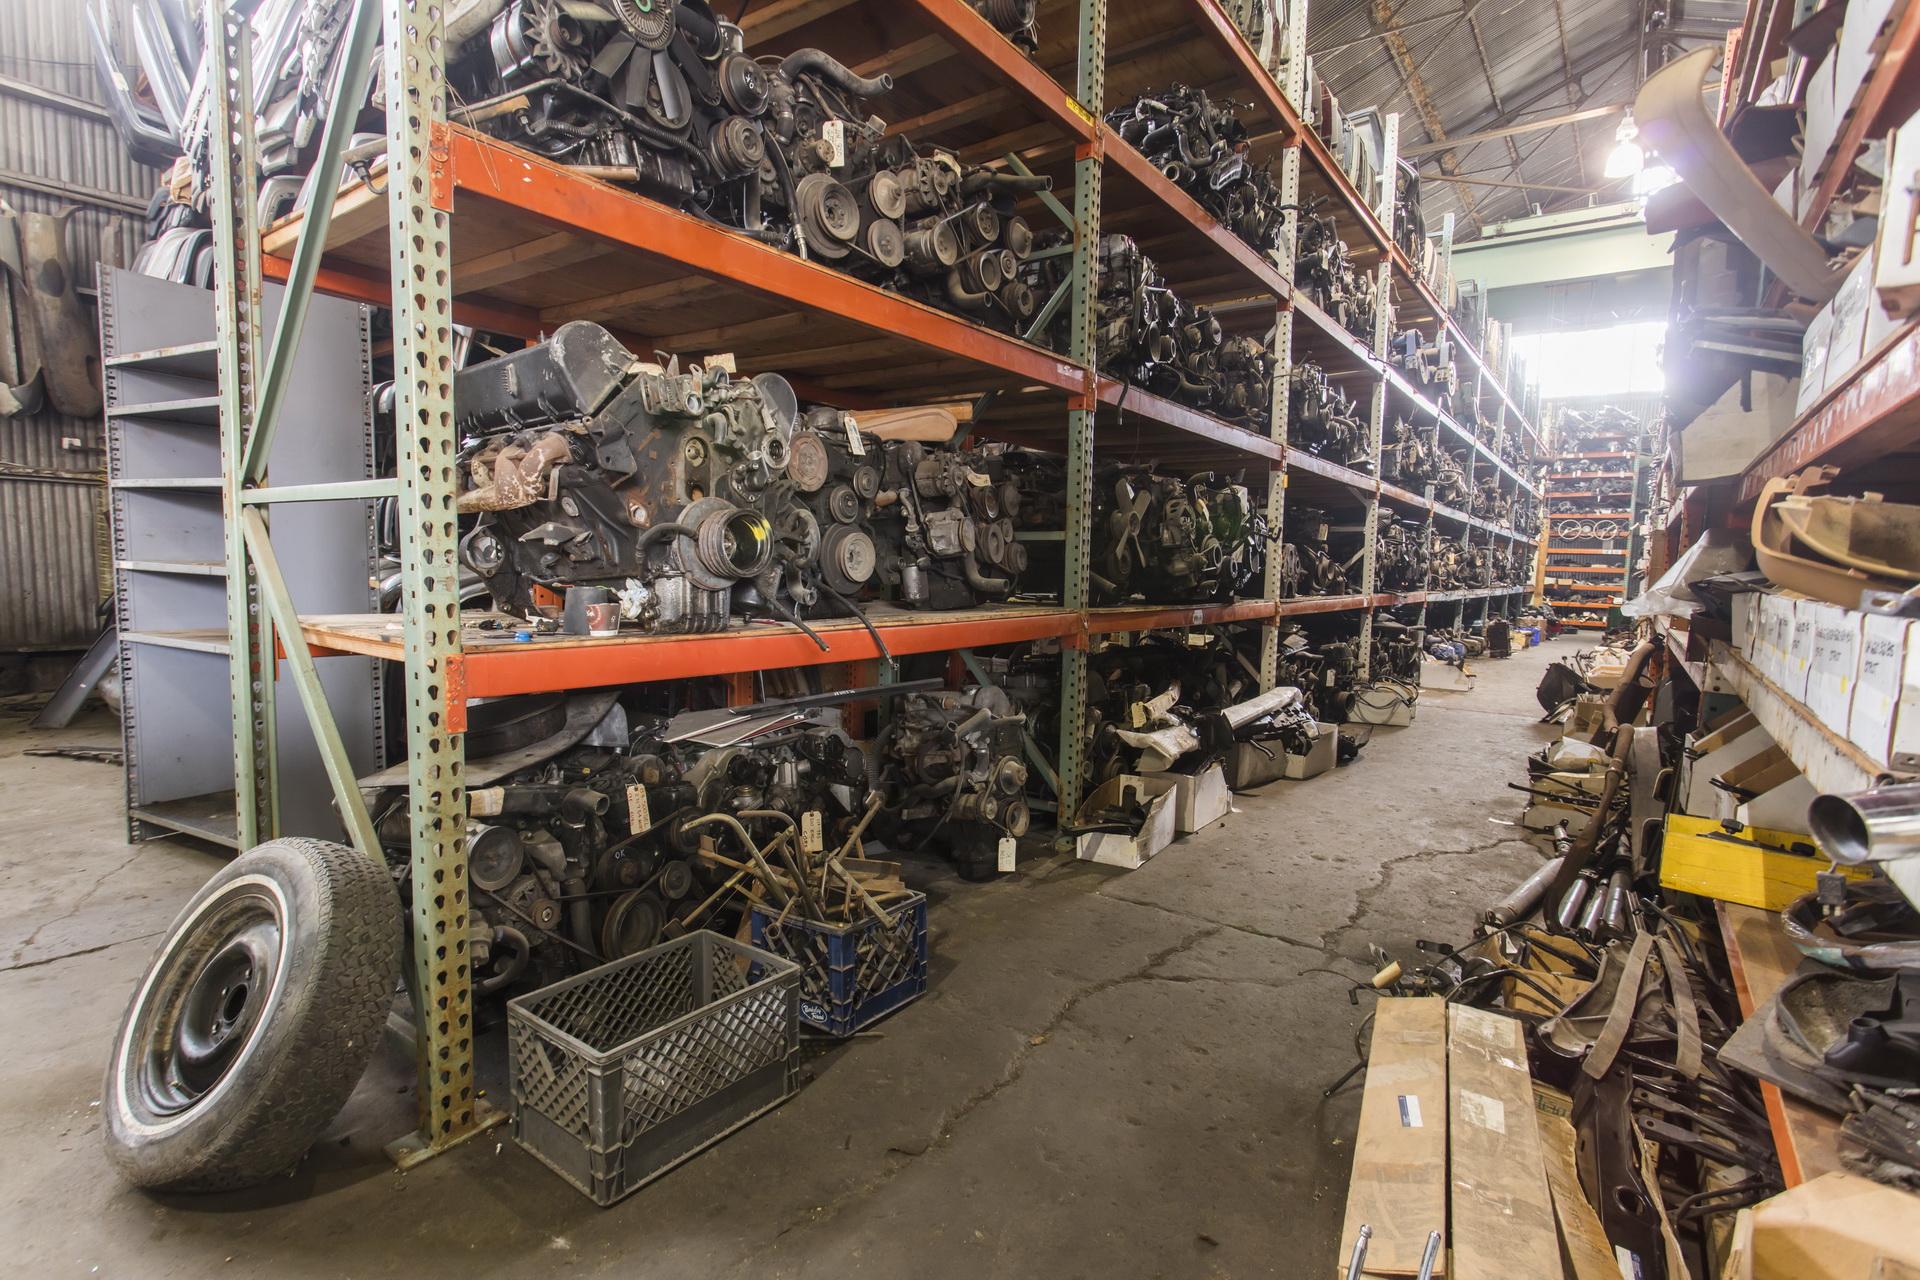 A Lifelong Collection of Expertly Curated Mercedes-Benz Parts from the 1950s to 2000s - One Lot